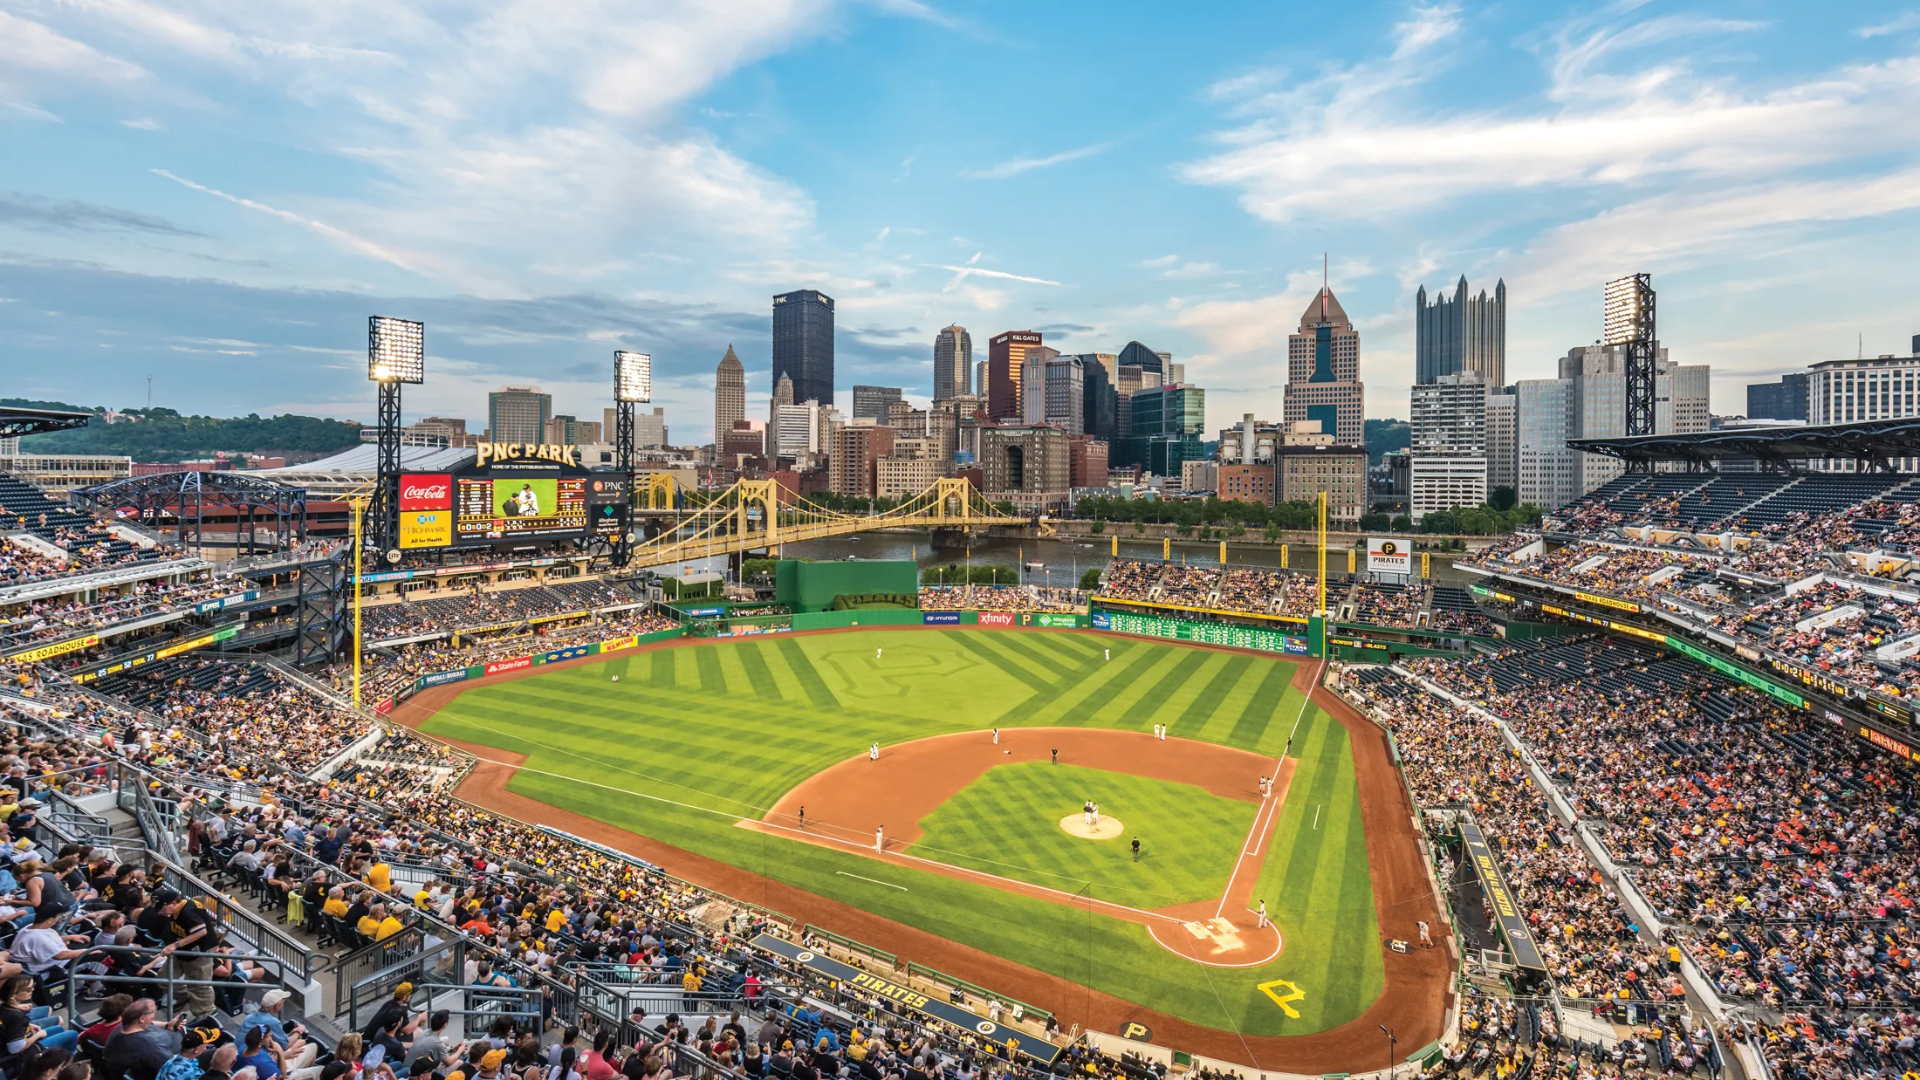 PNC Park Retrofitted with new LED Lighting